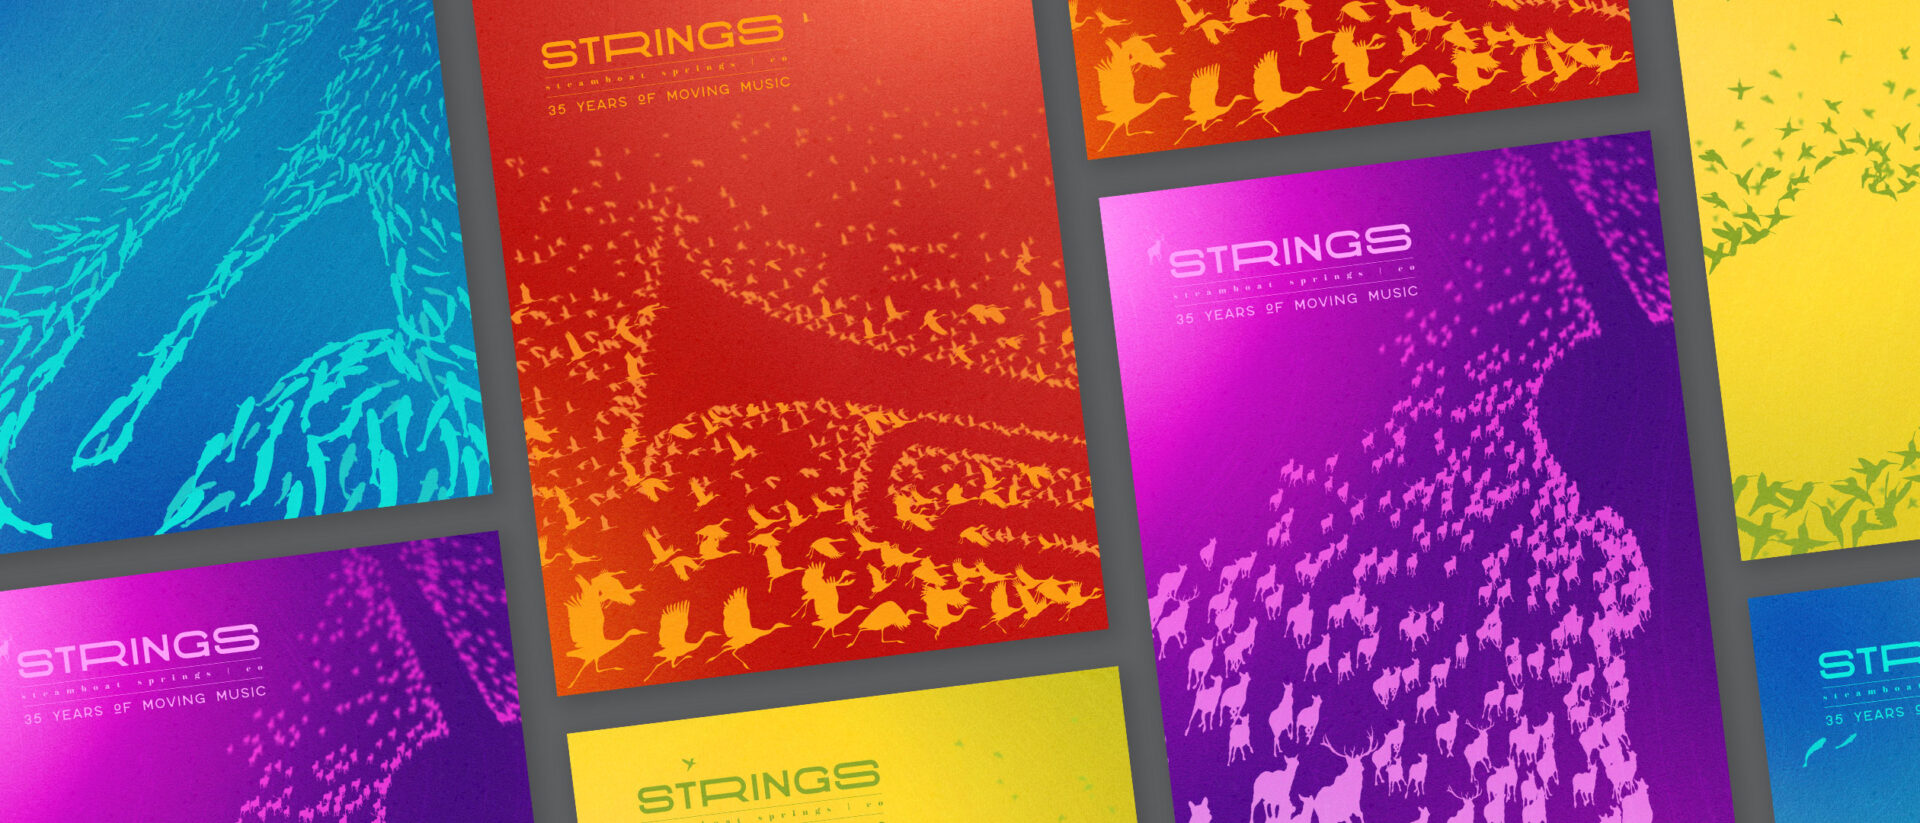 Strings music festival, 35 years of moving music, layout of colorful programs